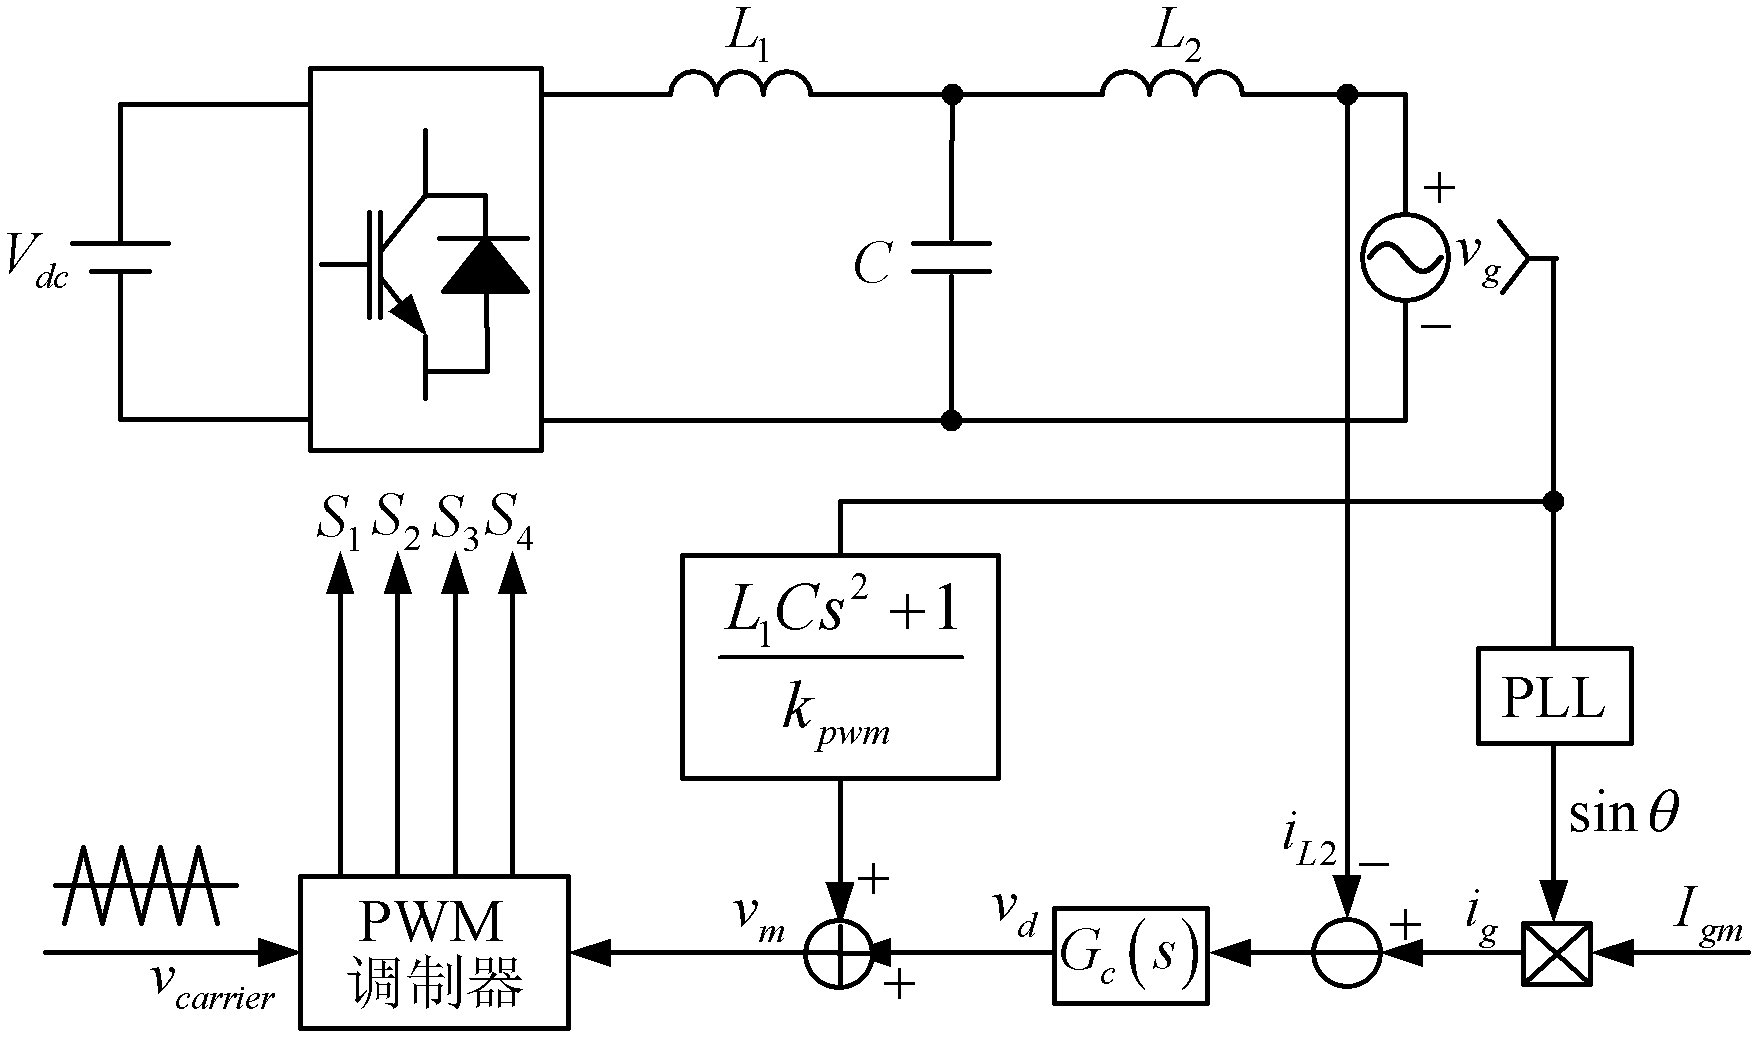 Method for controlling grid-connected inverter based on feed-forward compensation